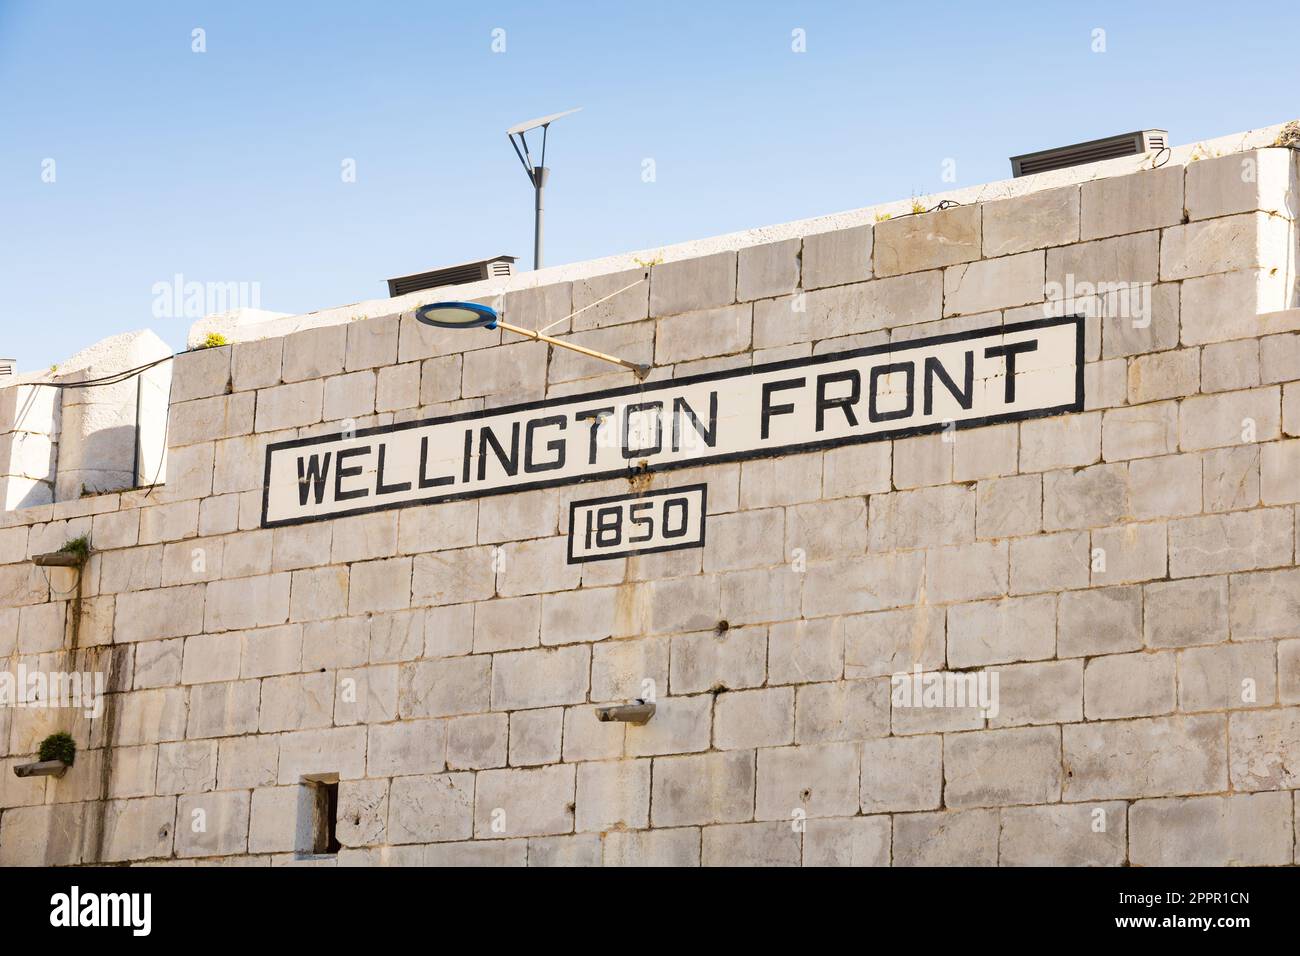 Wellington Front on the Line Curtain Wall, The British Overseas Territory of Gibraltar, the Rock of Gibraltar on the Iberian Peninsula. Stock Photo